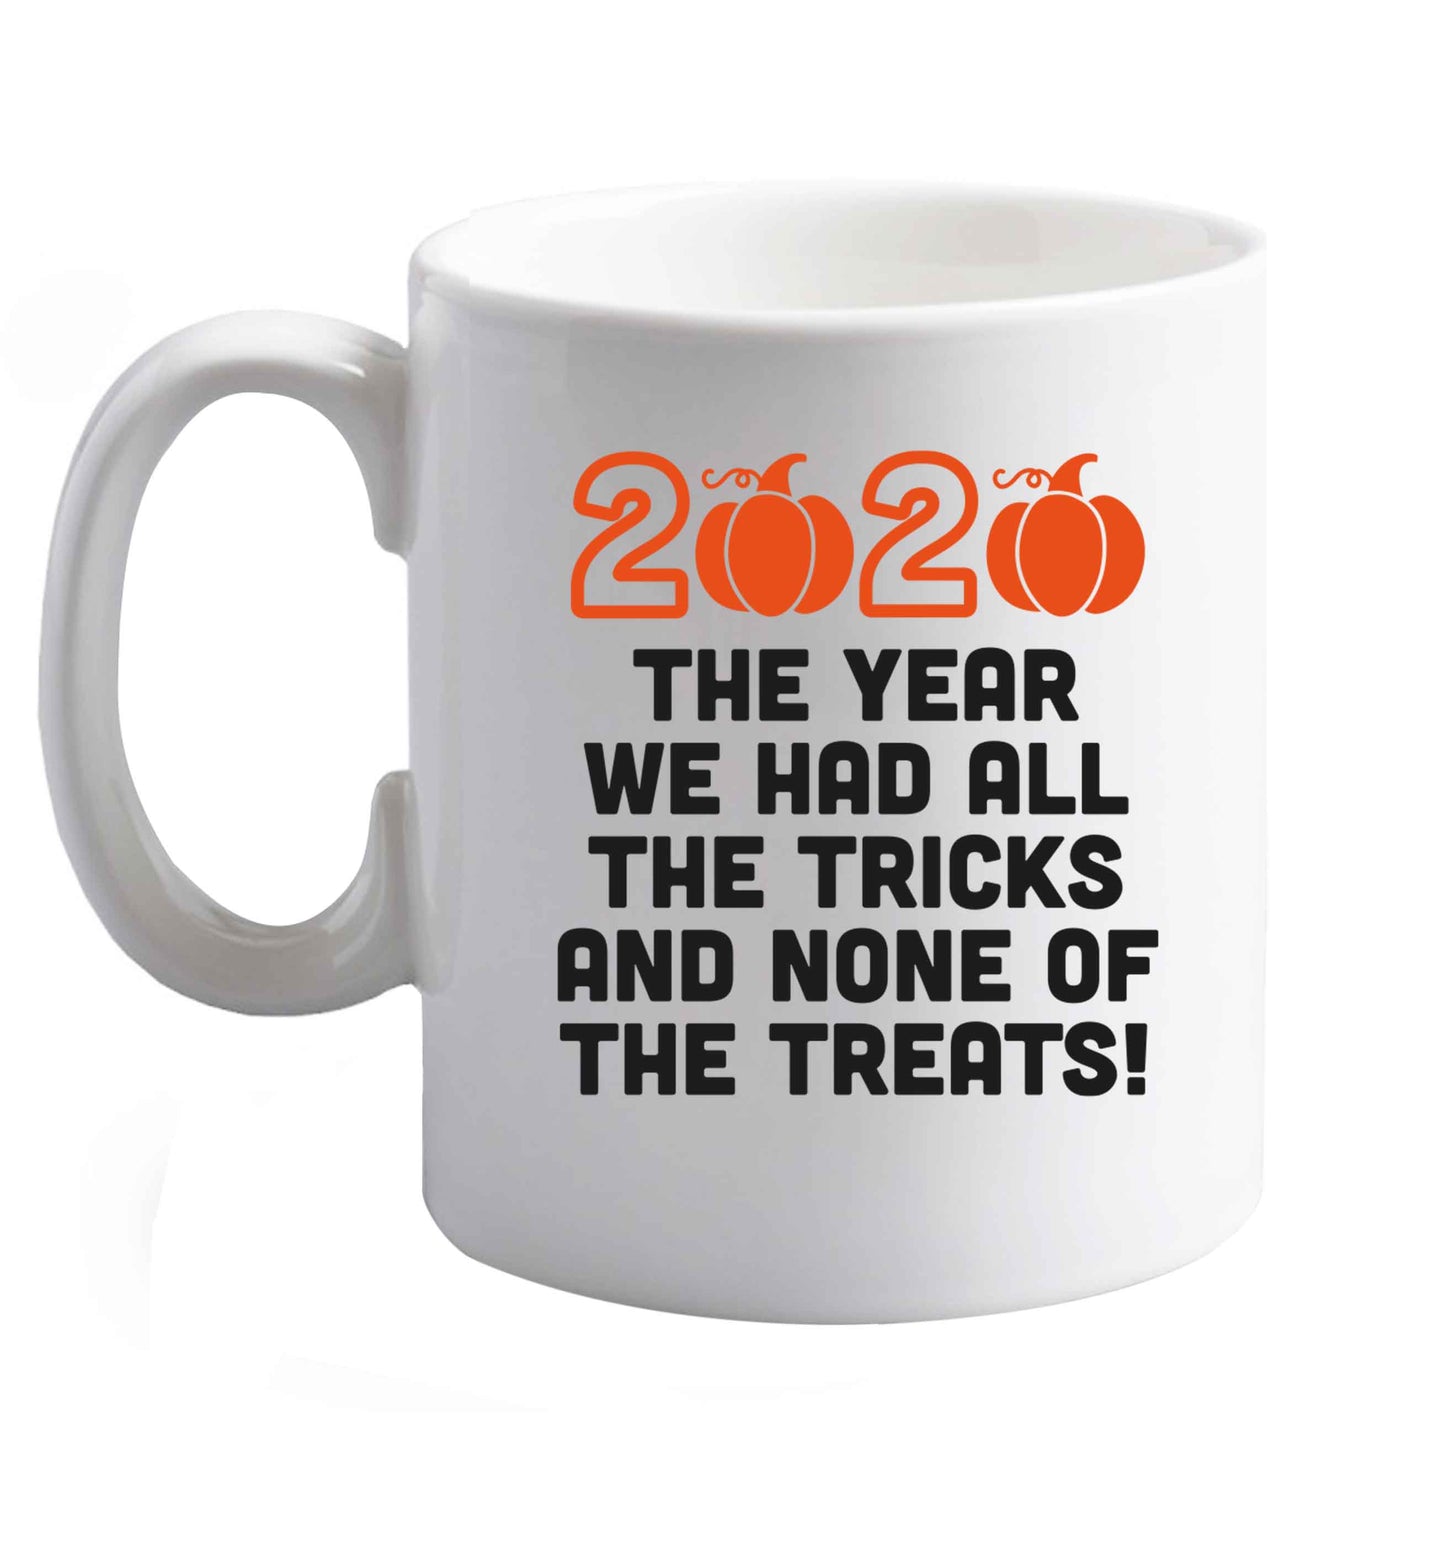 10 oz 2020 The year we had all of the tricks and none of the treats ceramic mug right handed